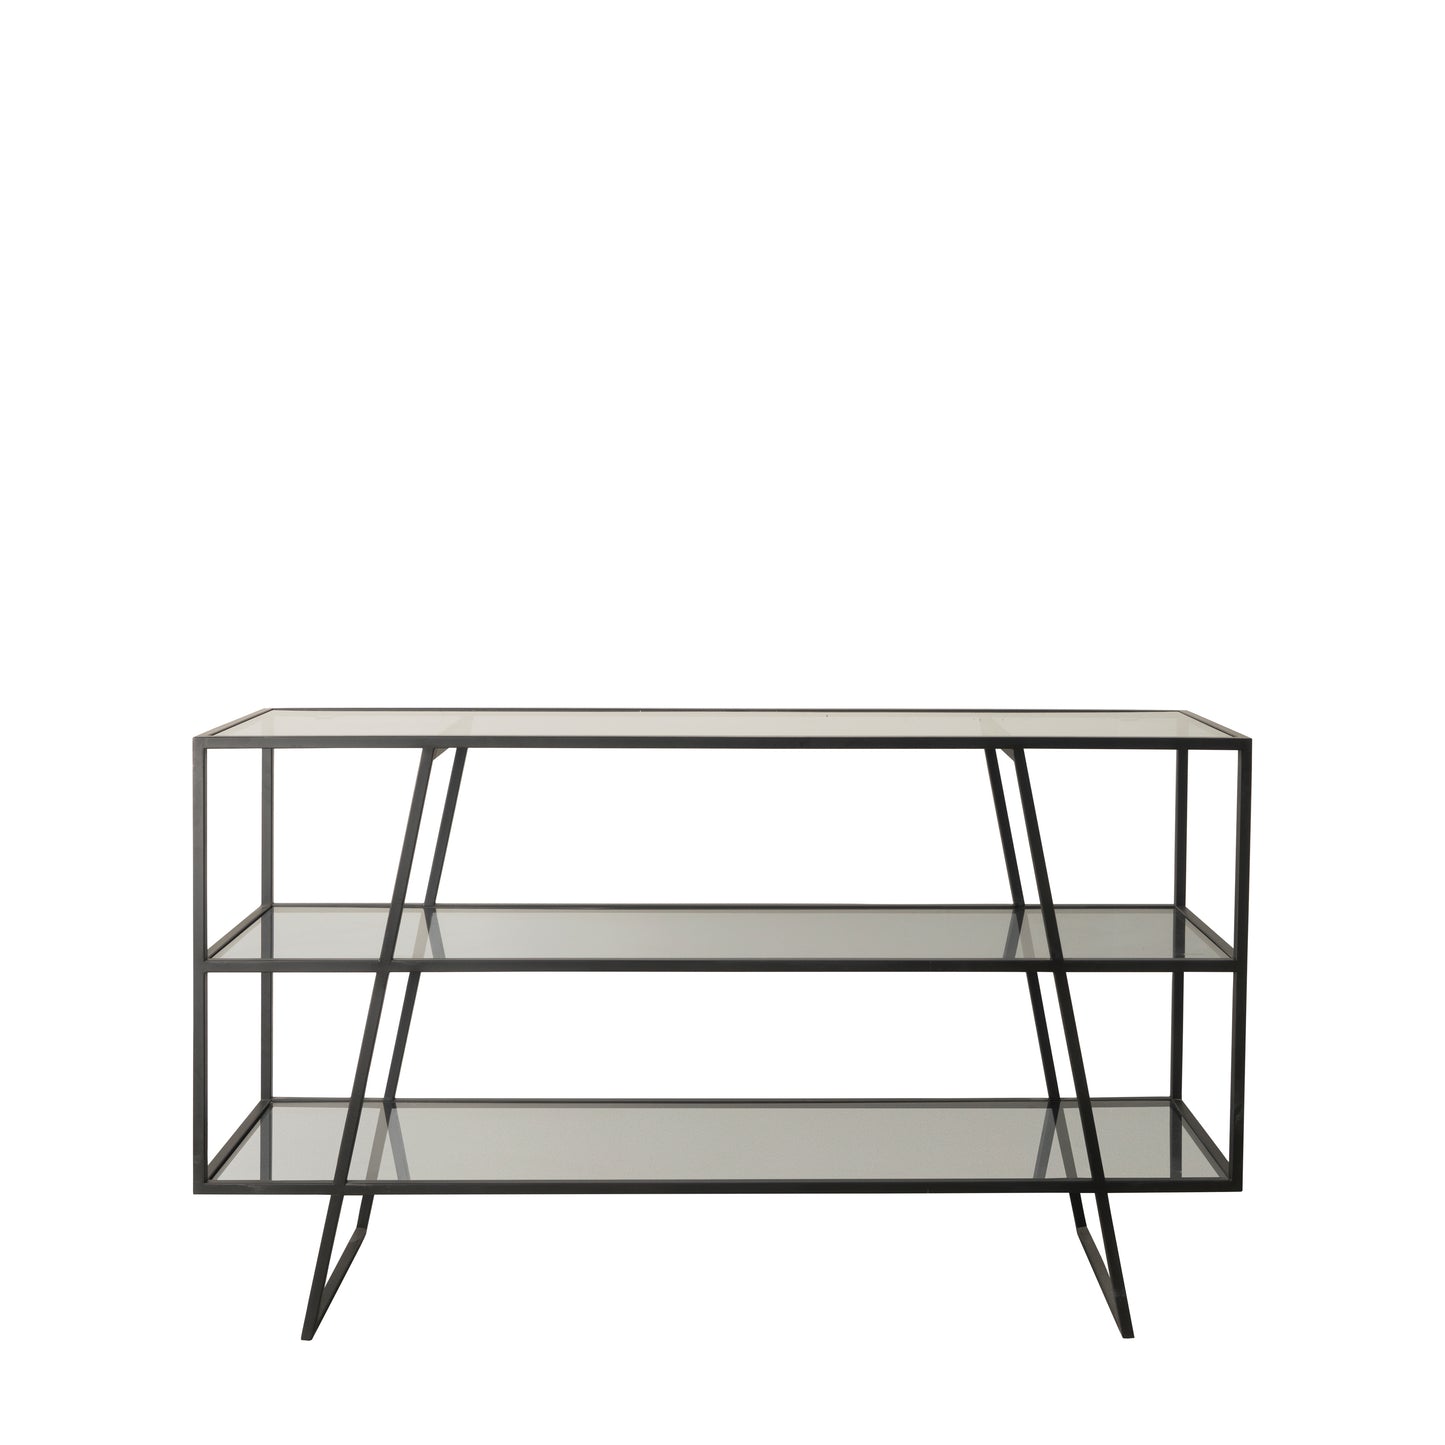 A Putney Console Table 1400x405x800mm with glass shelves and metal legs, ideal for interior decor, sold by Kikiathome.co.uk.